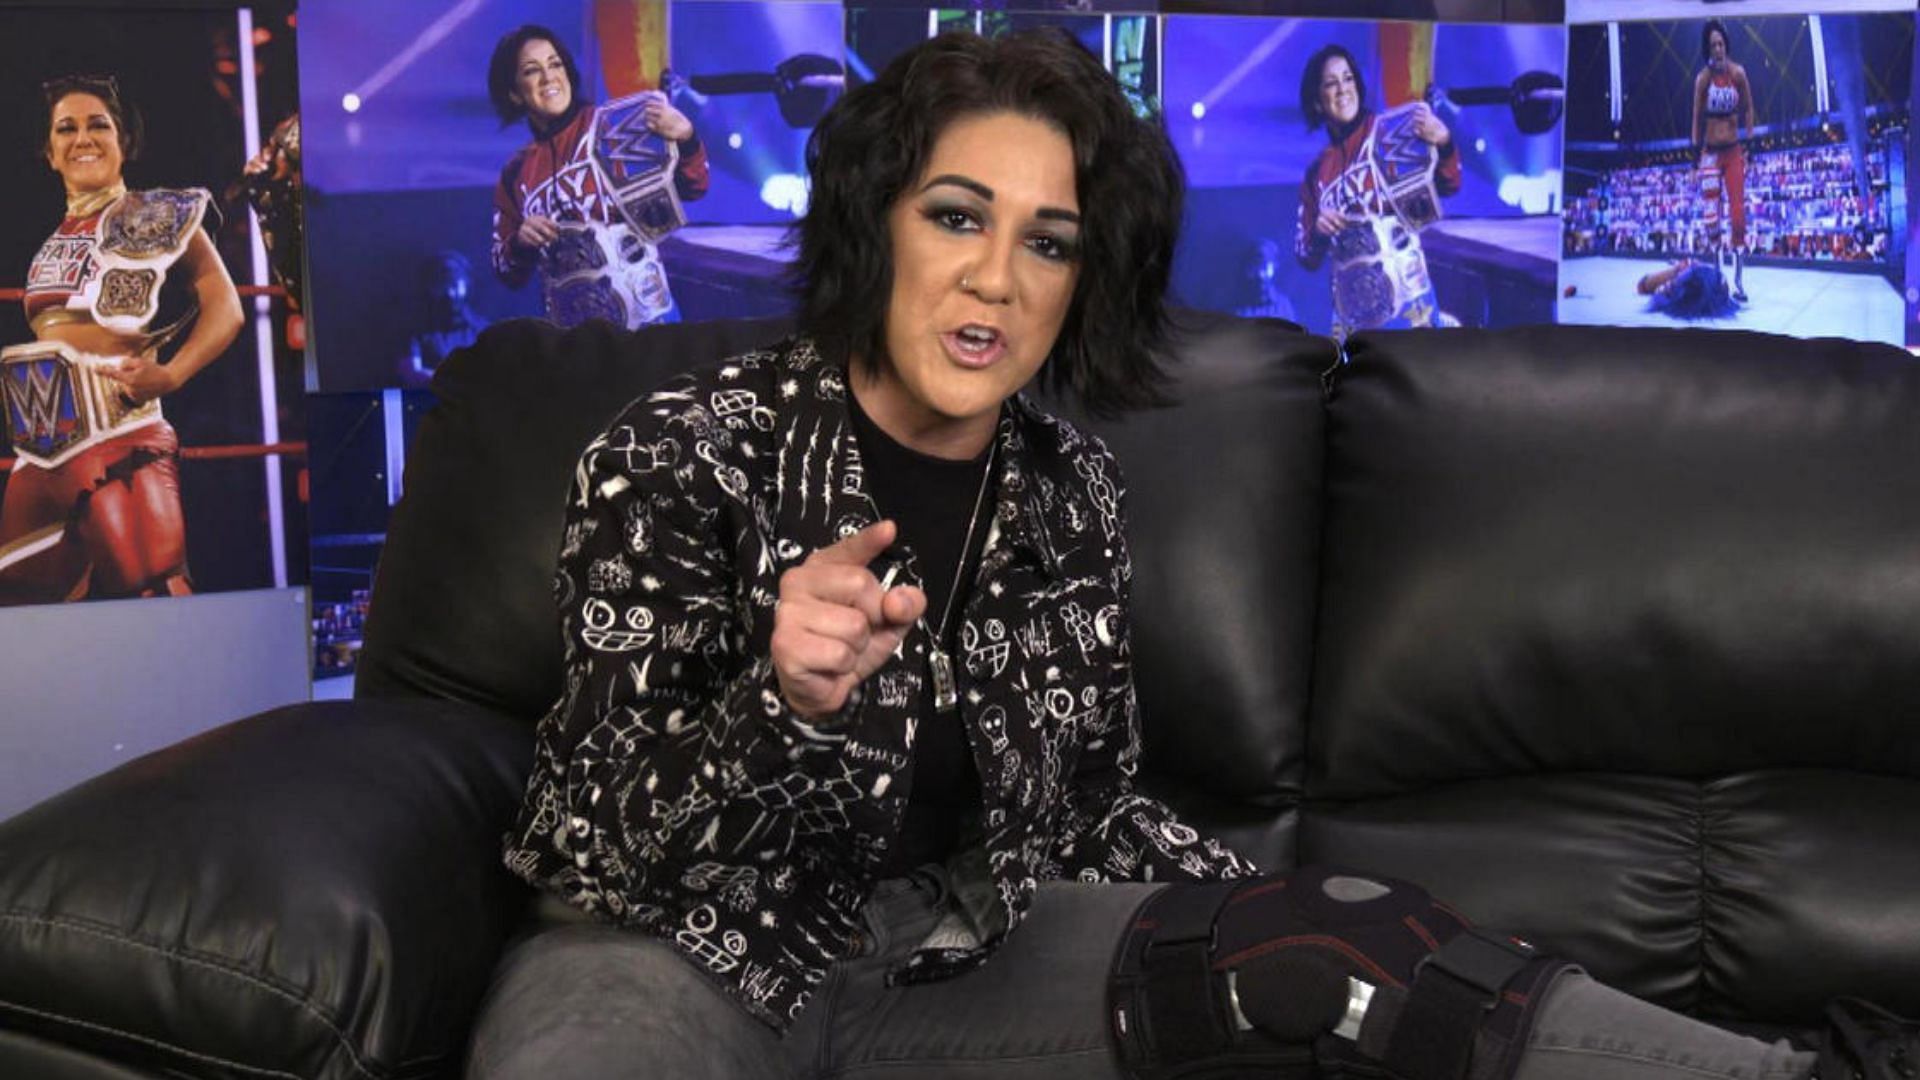 Bayley discussing her injury in the ThunderDome era of WWE